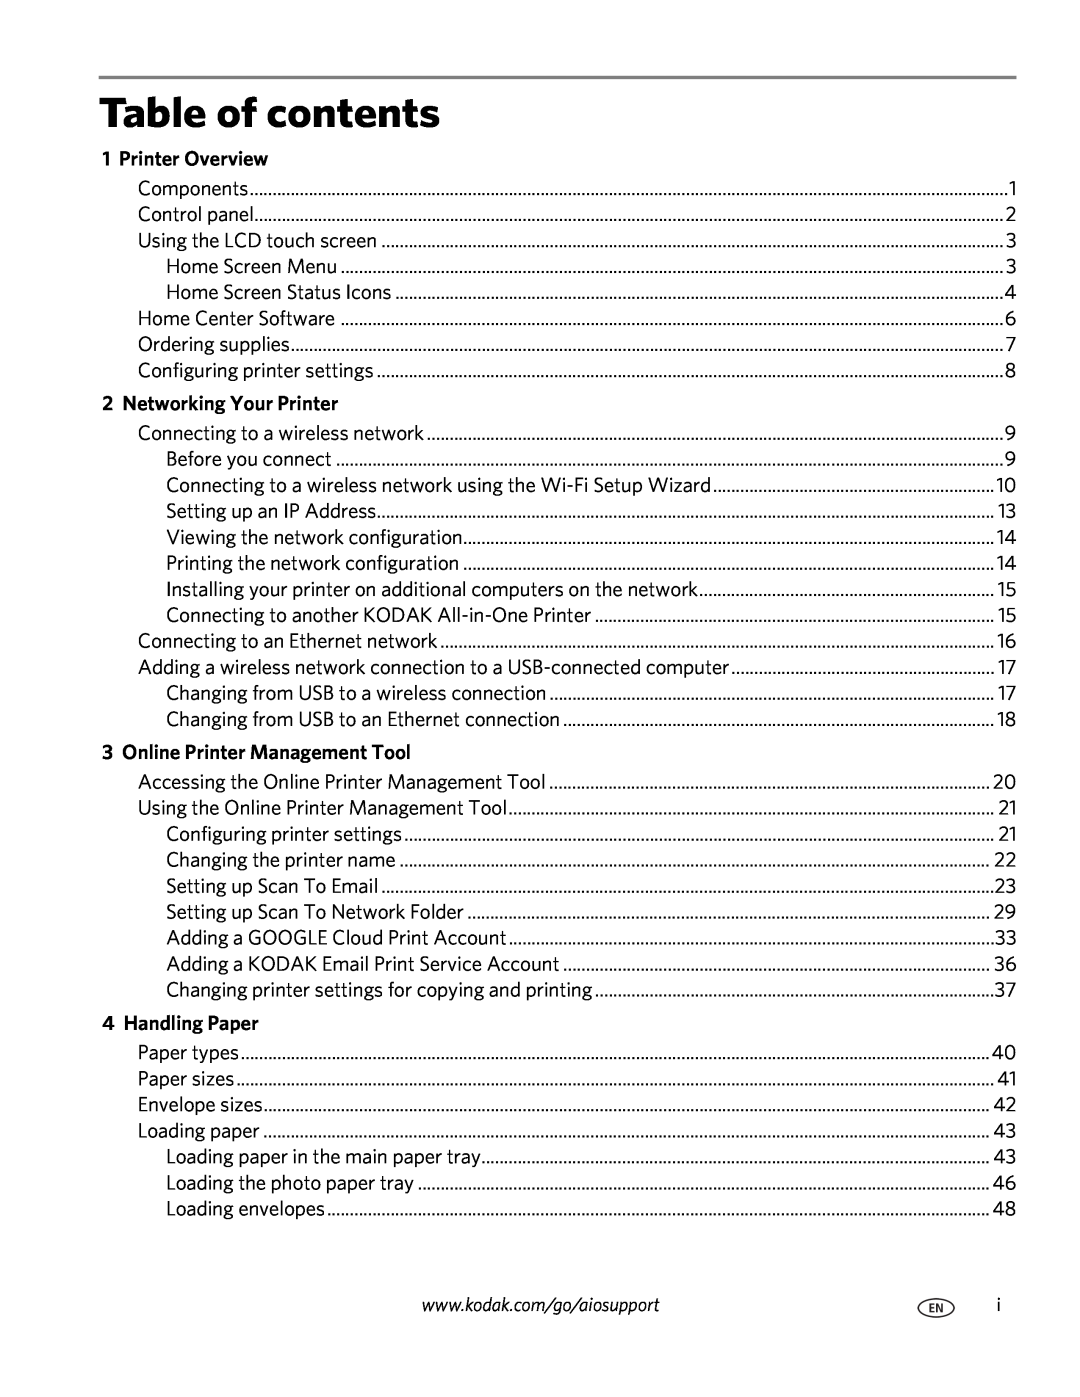 Kodak 7.1 Table of contents, Printer Overview, Networking Your Printer, Online Printer Management Tool, Handling Paper 